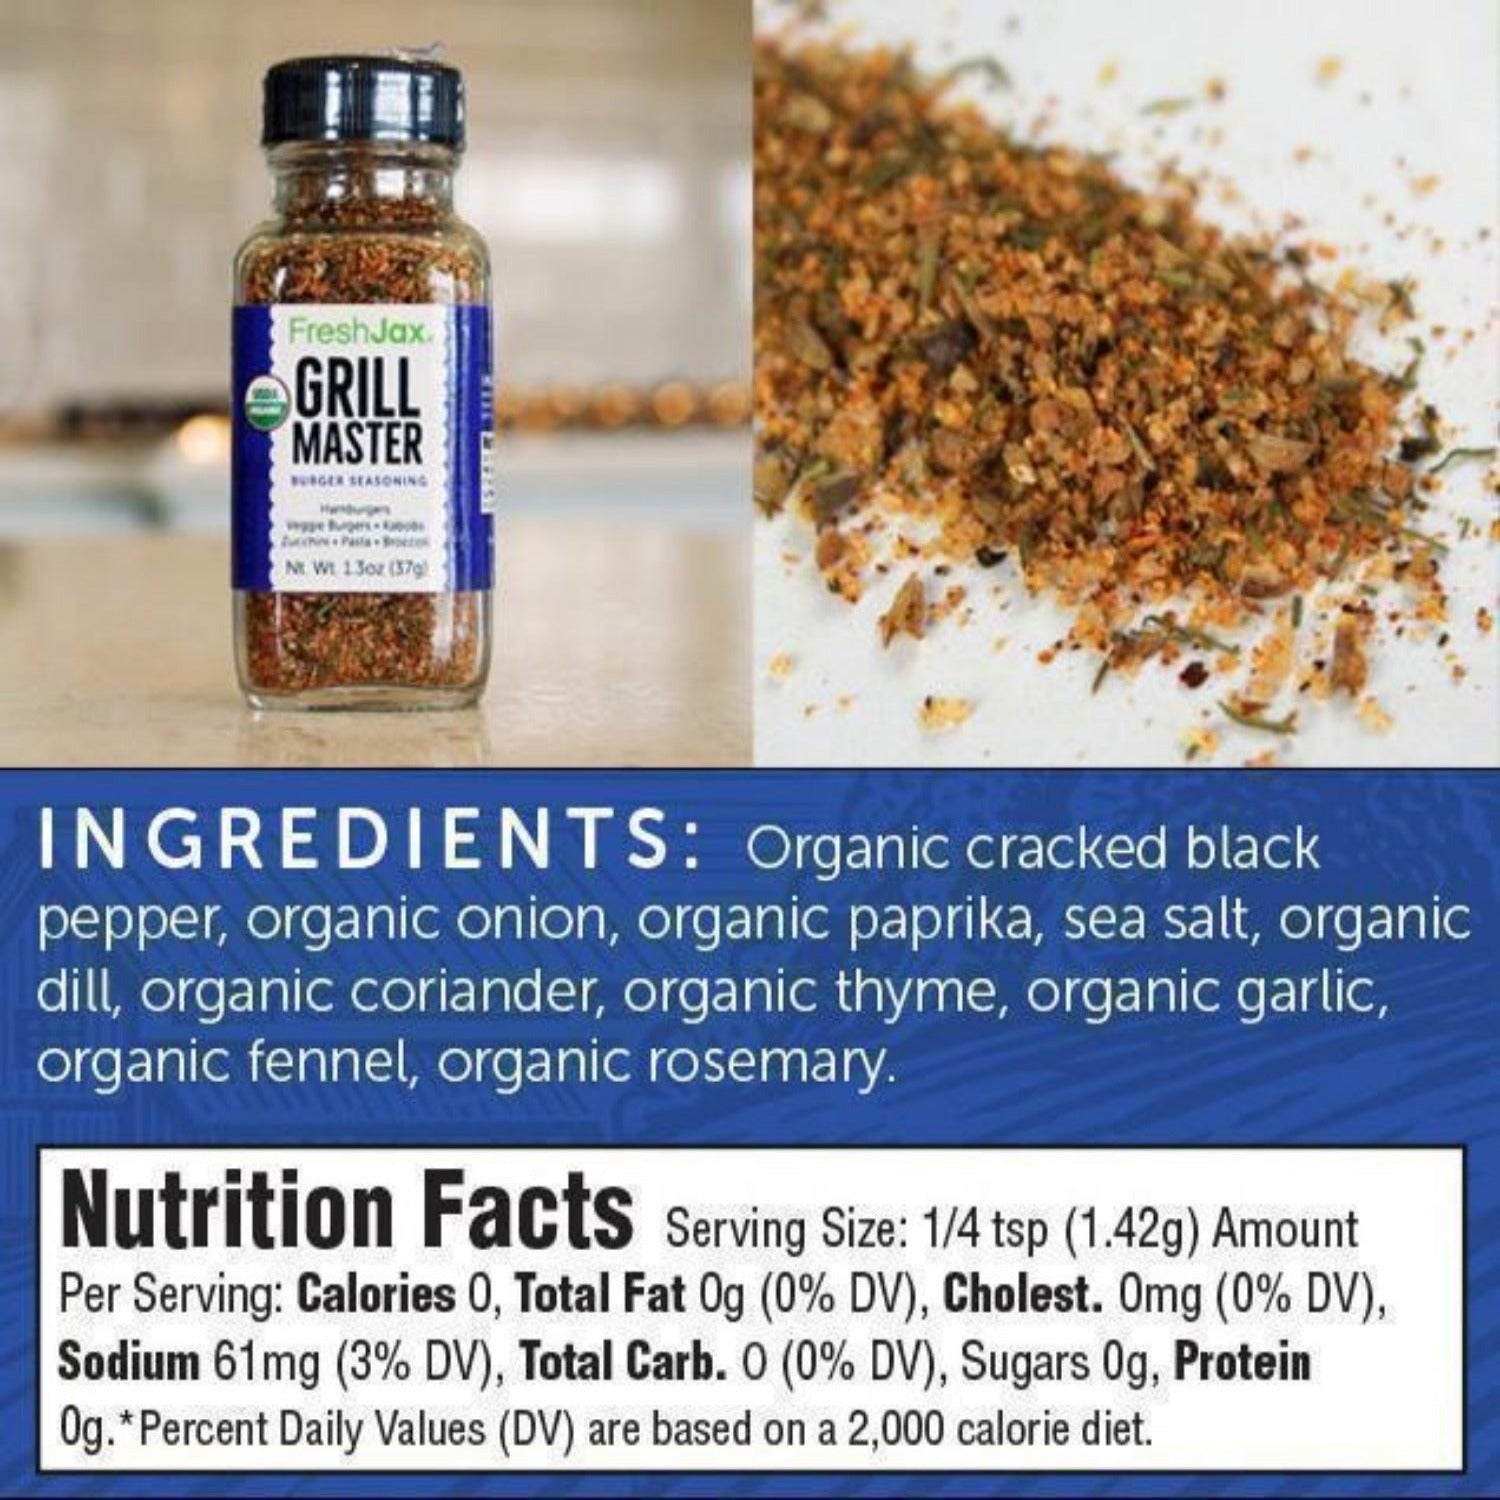 Grill Master Burger Seasoning Ingredients and Nutritional Information